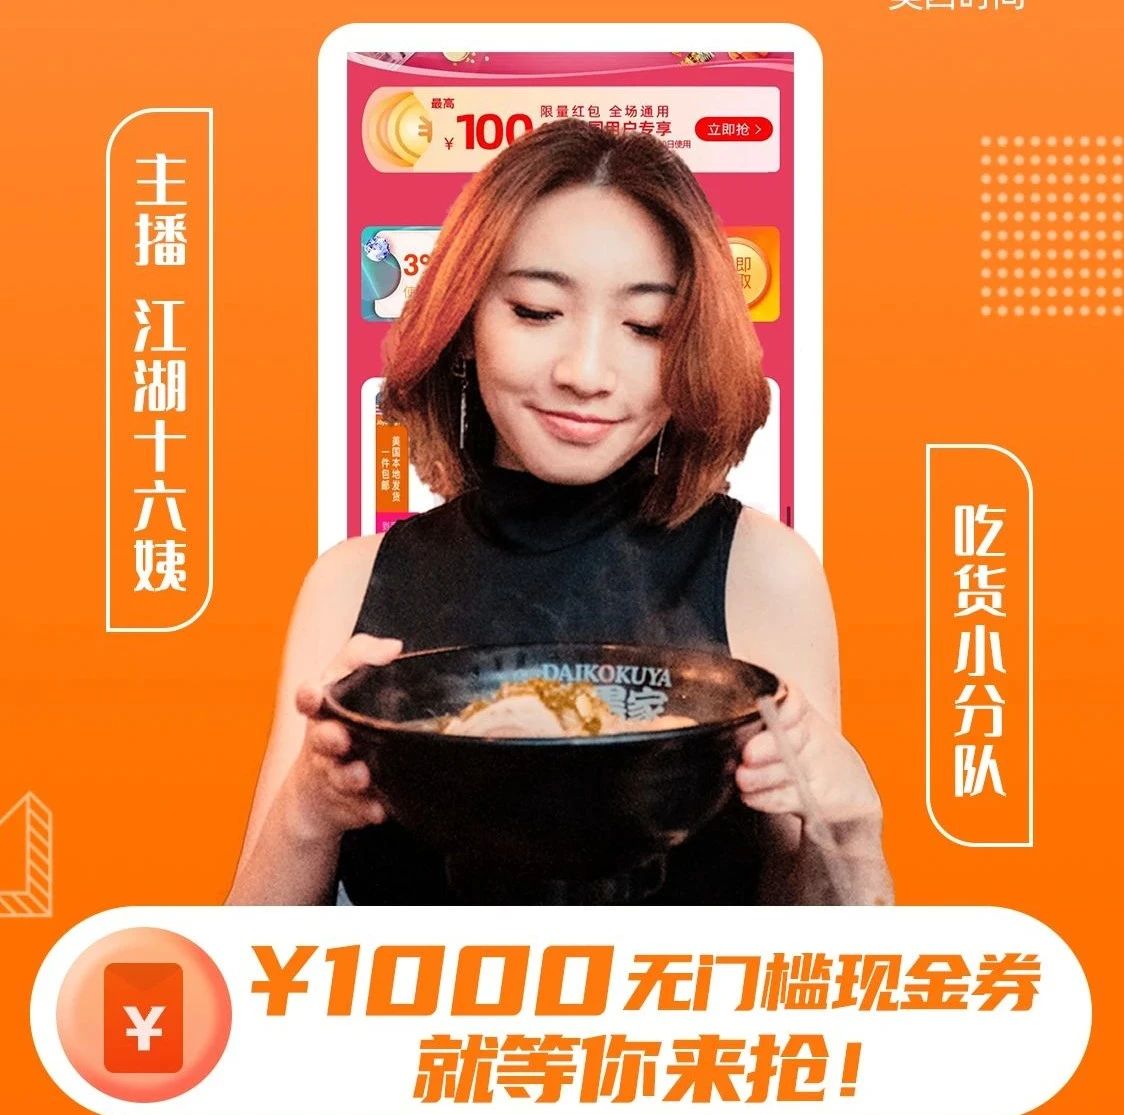 Chihou X Taobao's first live show is tonight: grab cash coupons, achieve snail powder at home, cross the rice noodles, and free water!